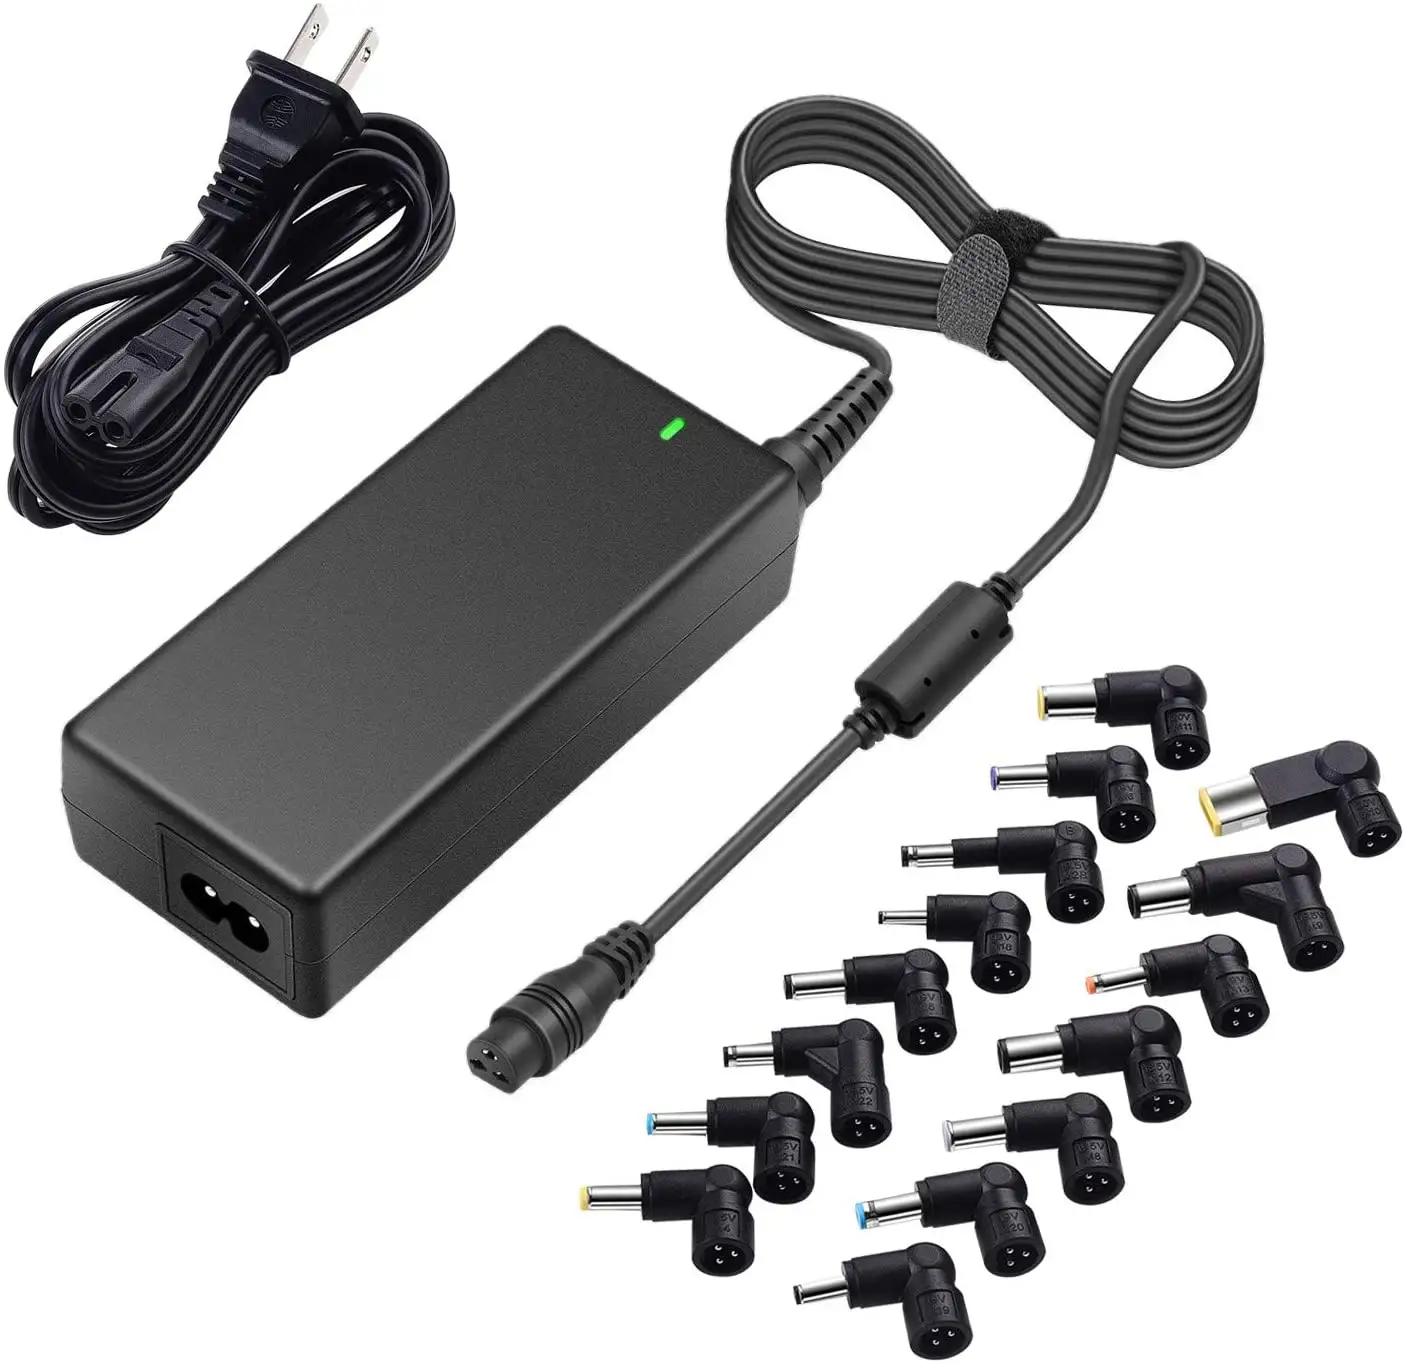 Fast Deliver DC 65w Laptop universal charger with 16 tips for HP Dell Lenovo Samsung Asus Acer